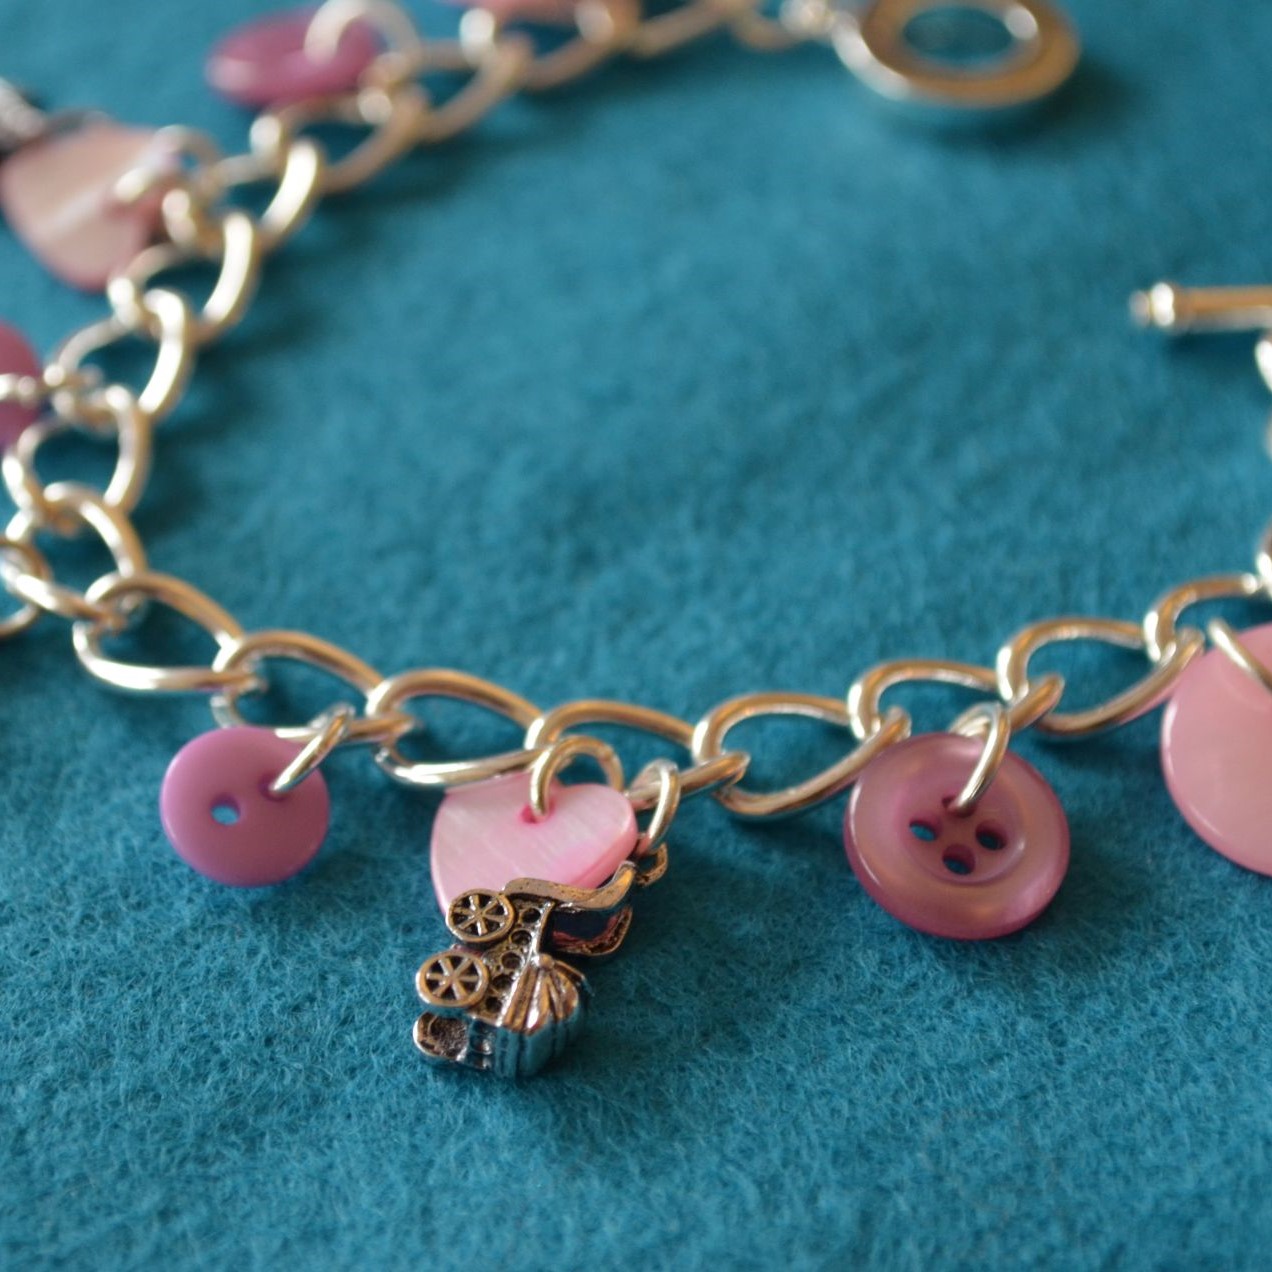 New Baby Button Charm Bracelet Baby Shower